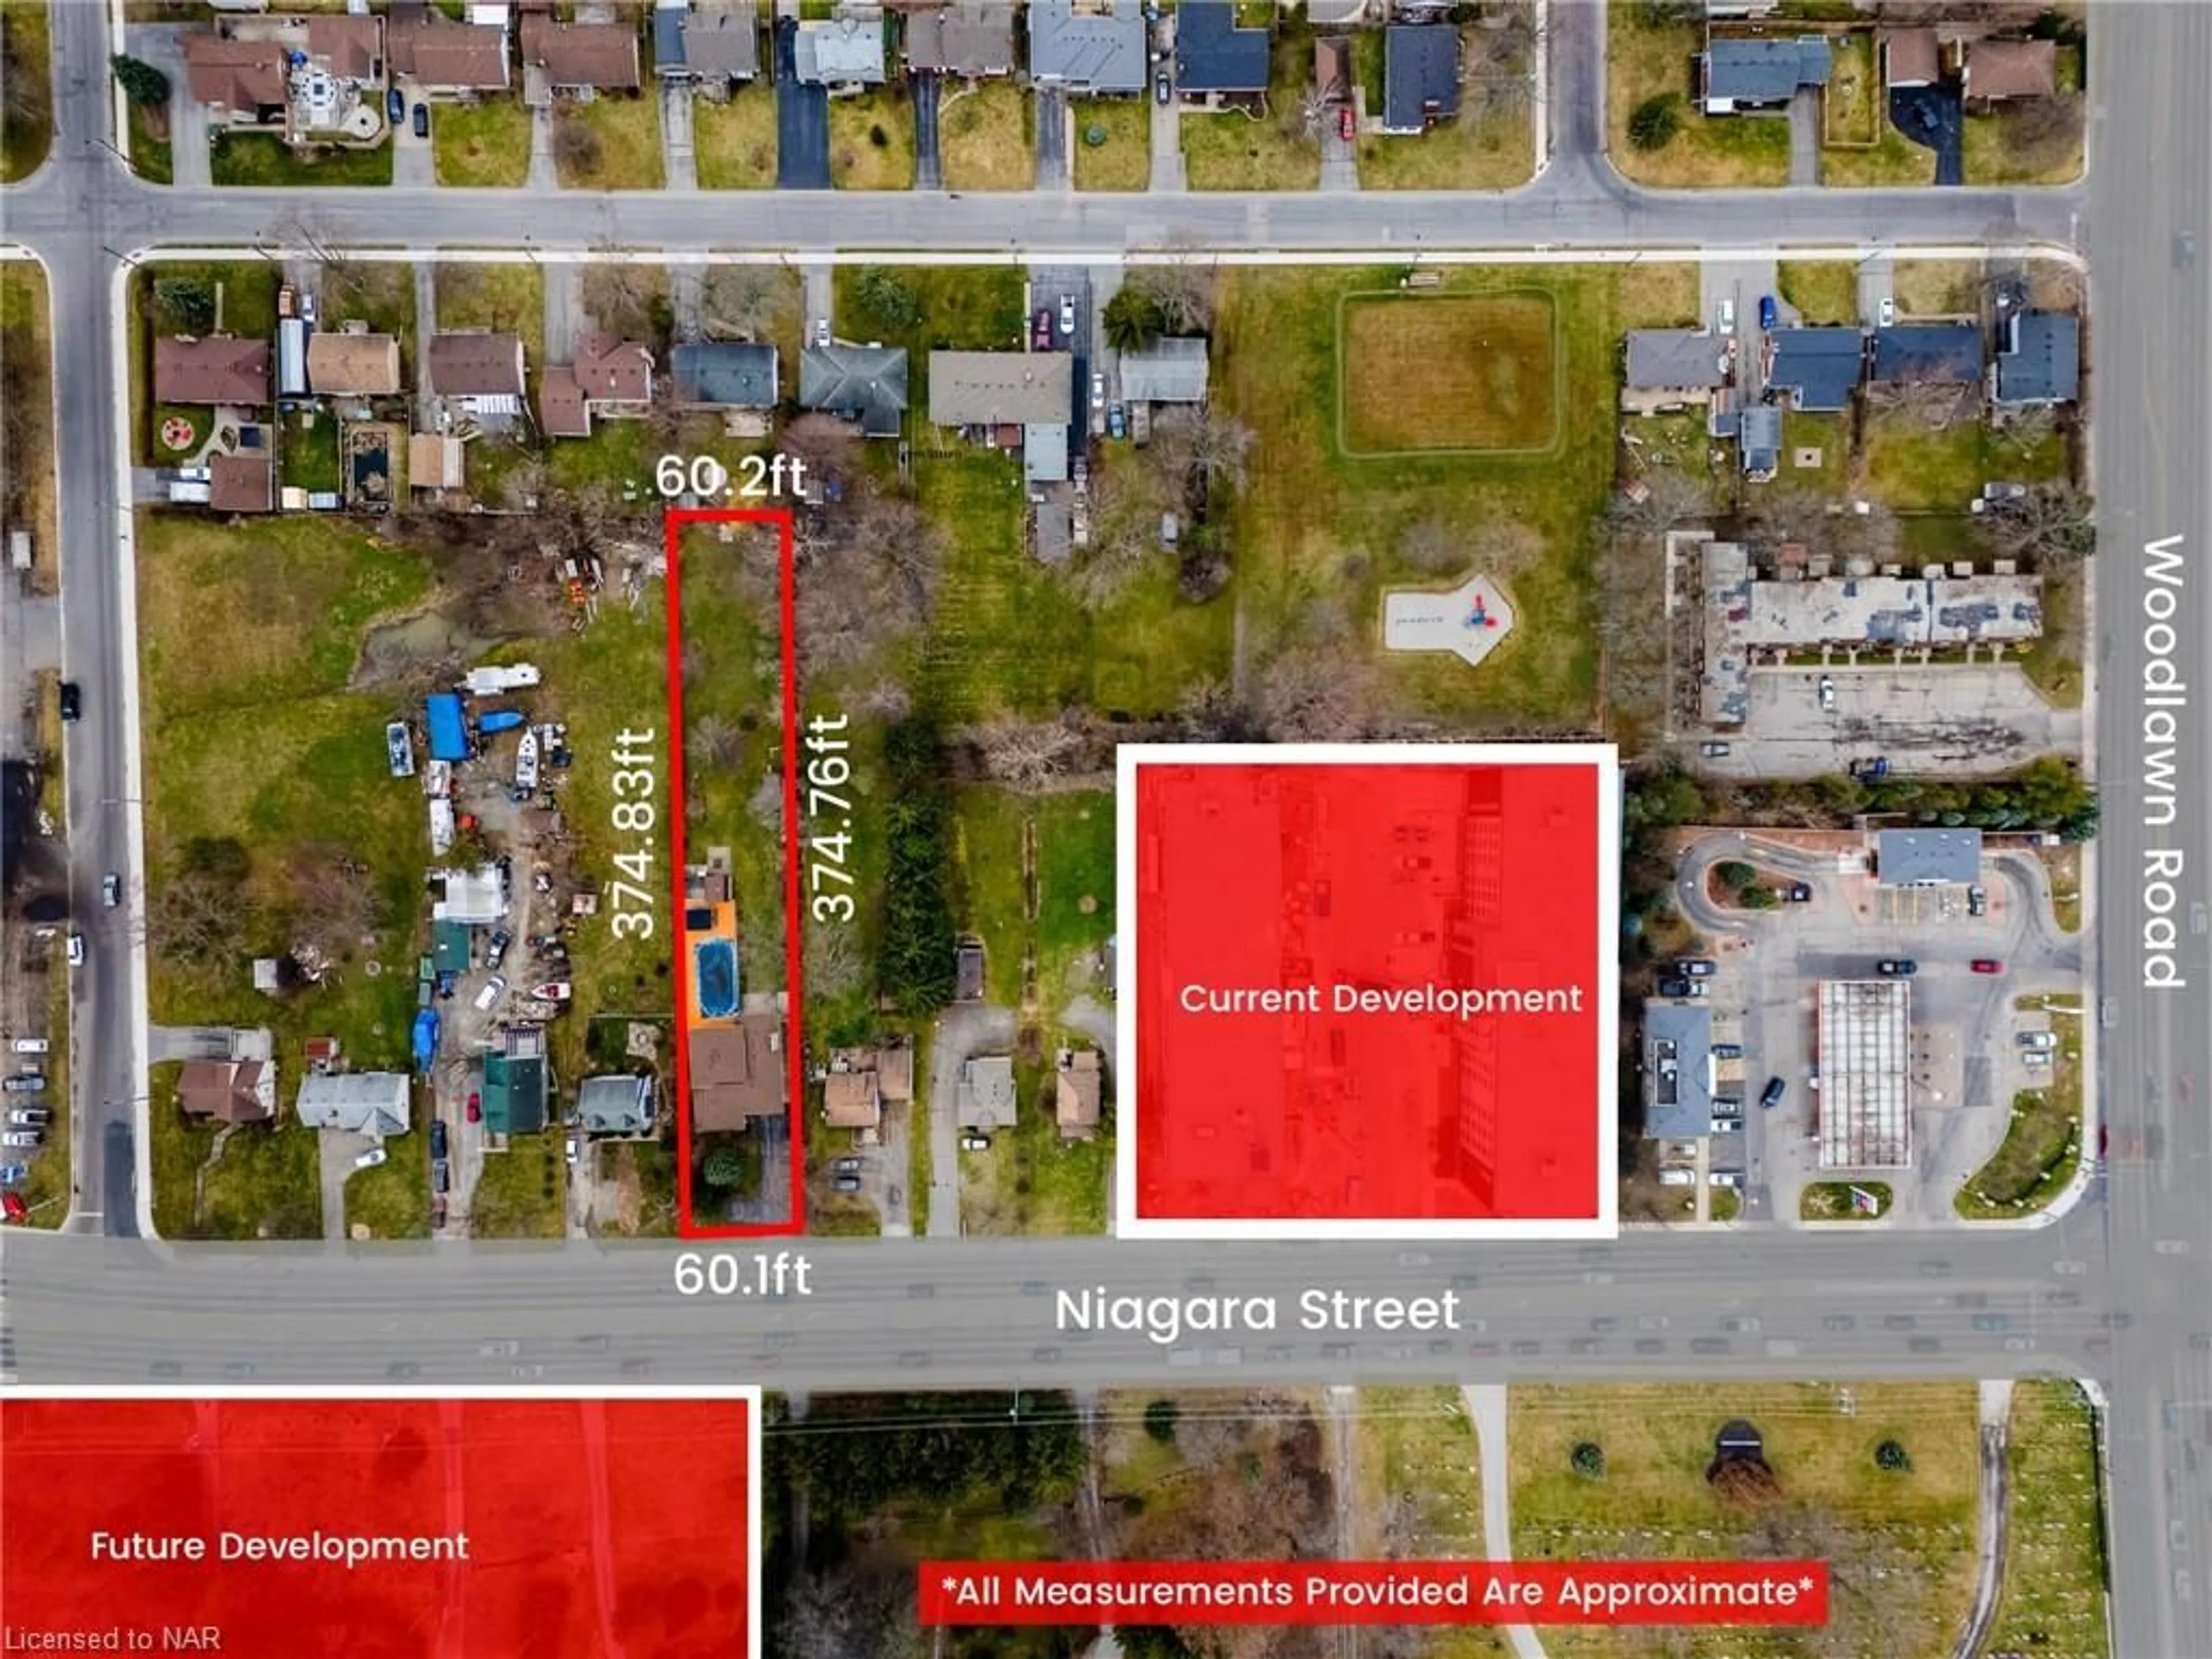 Picture of a map for 679 Niagara St N, Welland Ontario L3C 1M2